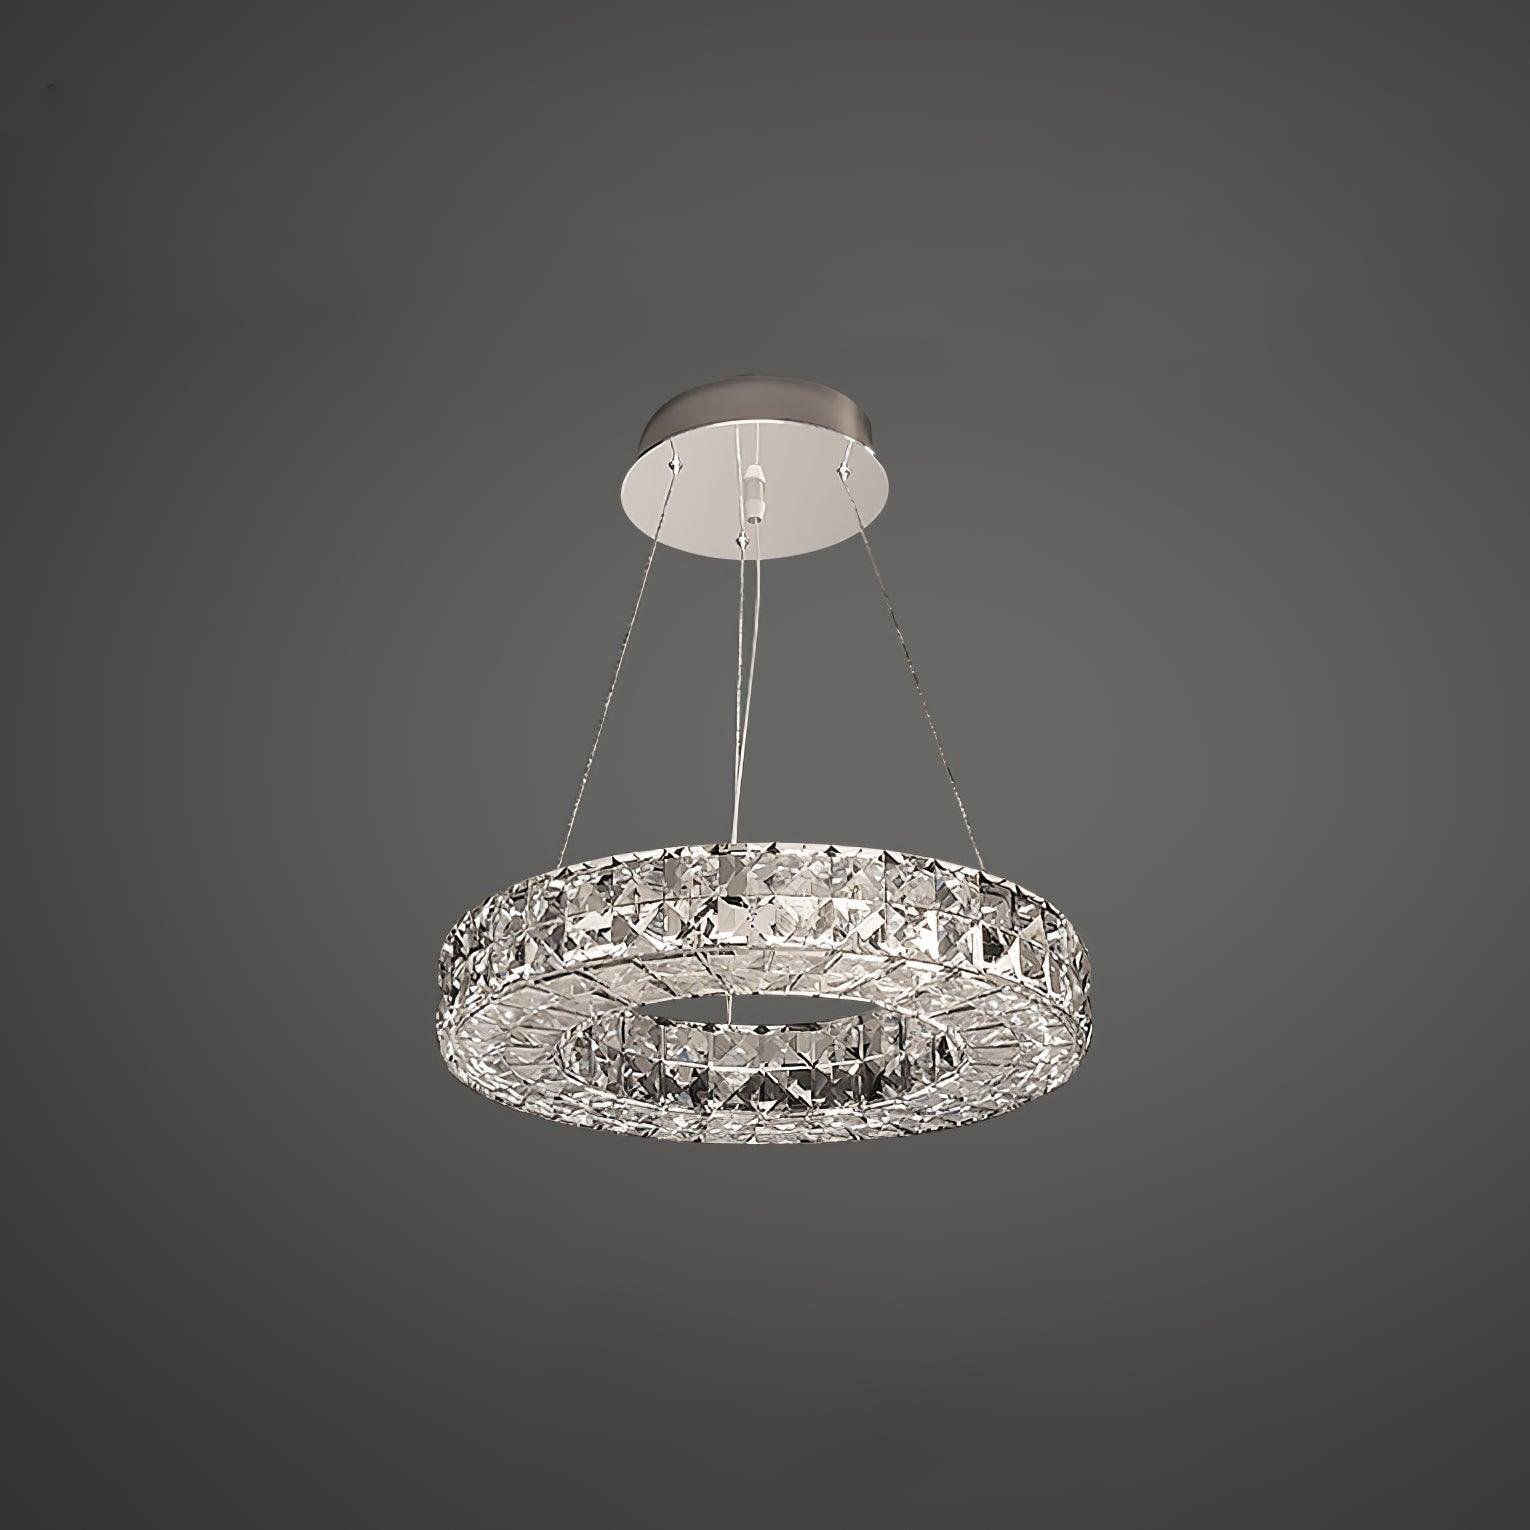 Chandelier Spiridon in Silver, Cool White, with a Diameter of 15.7" and a Height of 59" (40cm x 150cm)